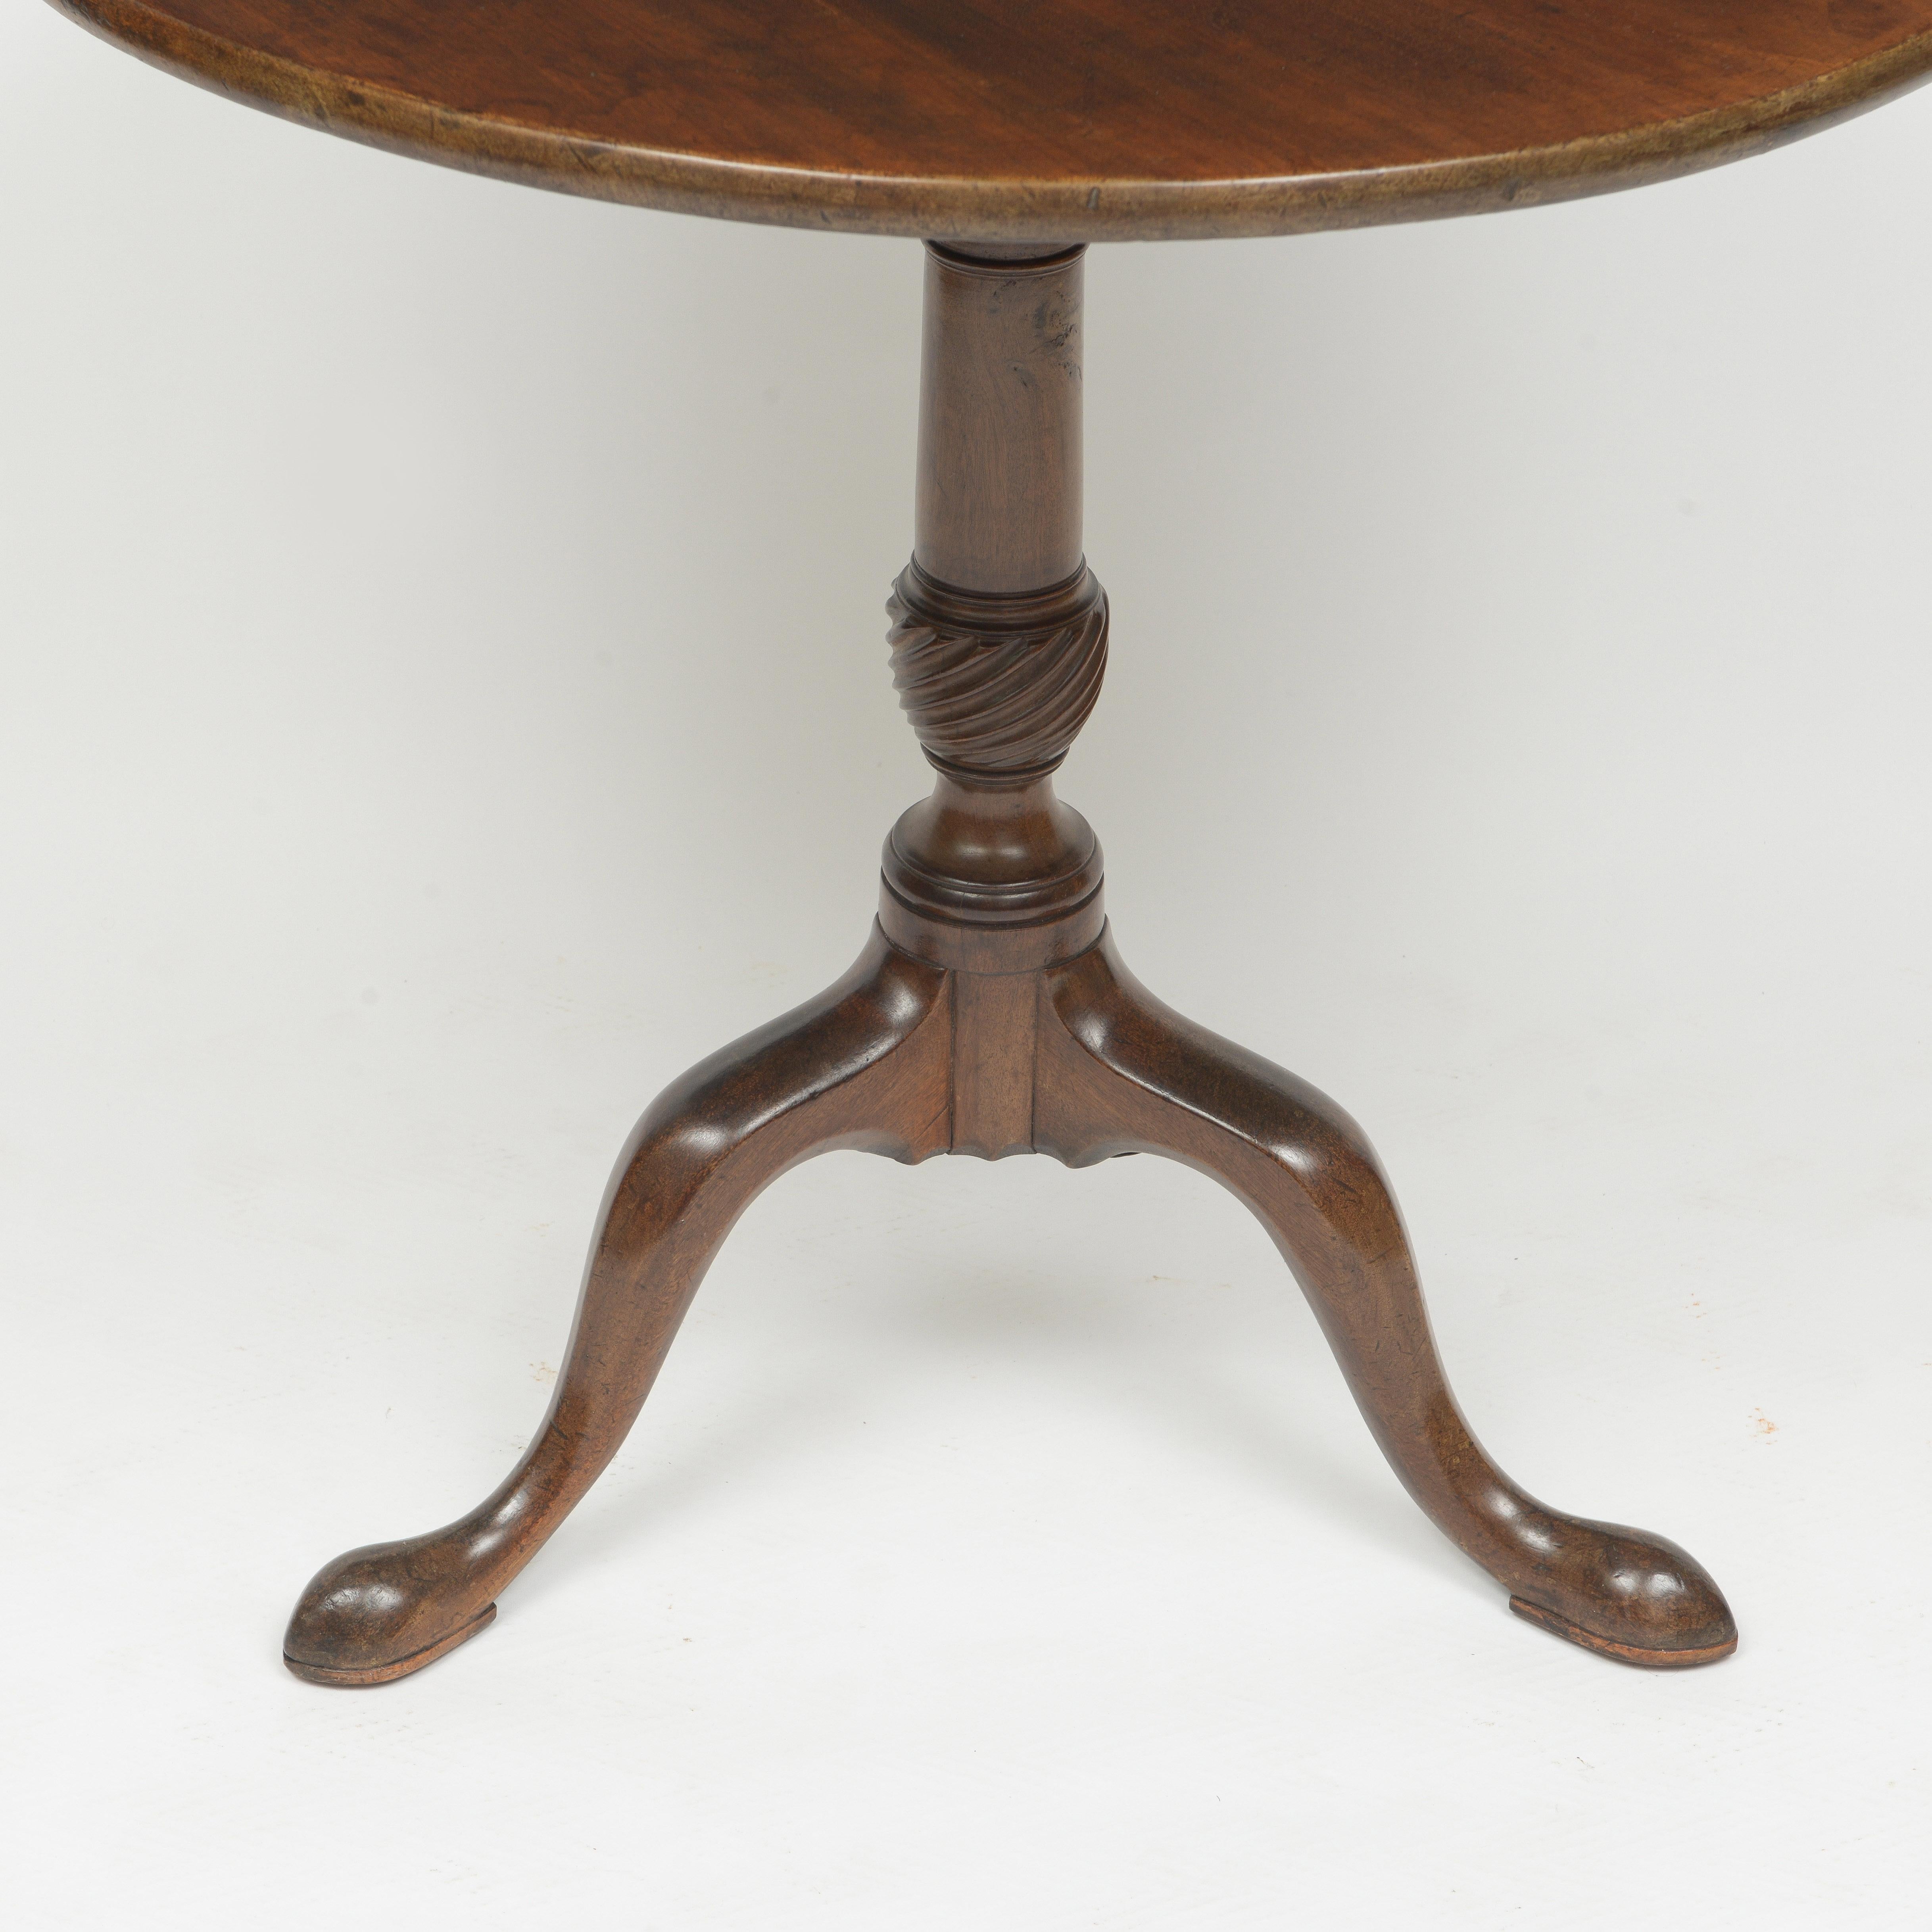 18th Century Round Top Tripod Table in Walnut Finished With Shellac and Wax Finish For Sale